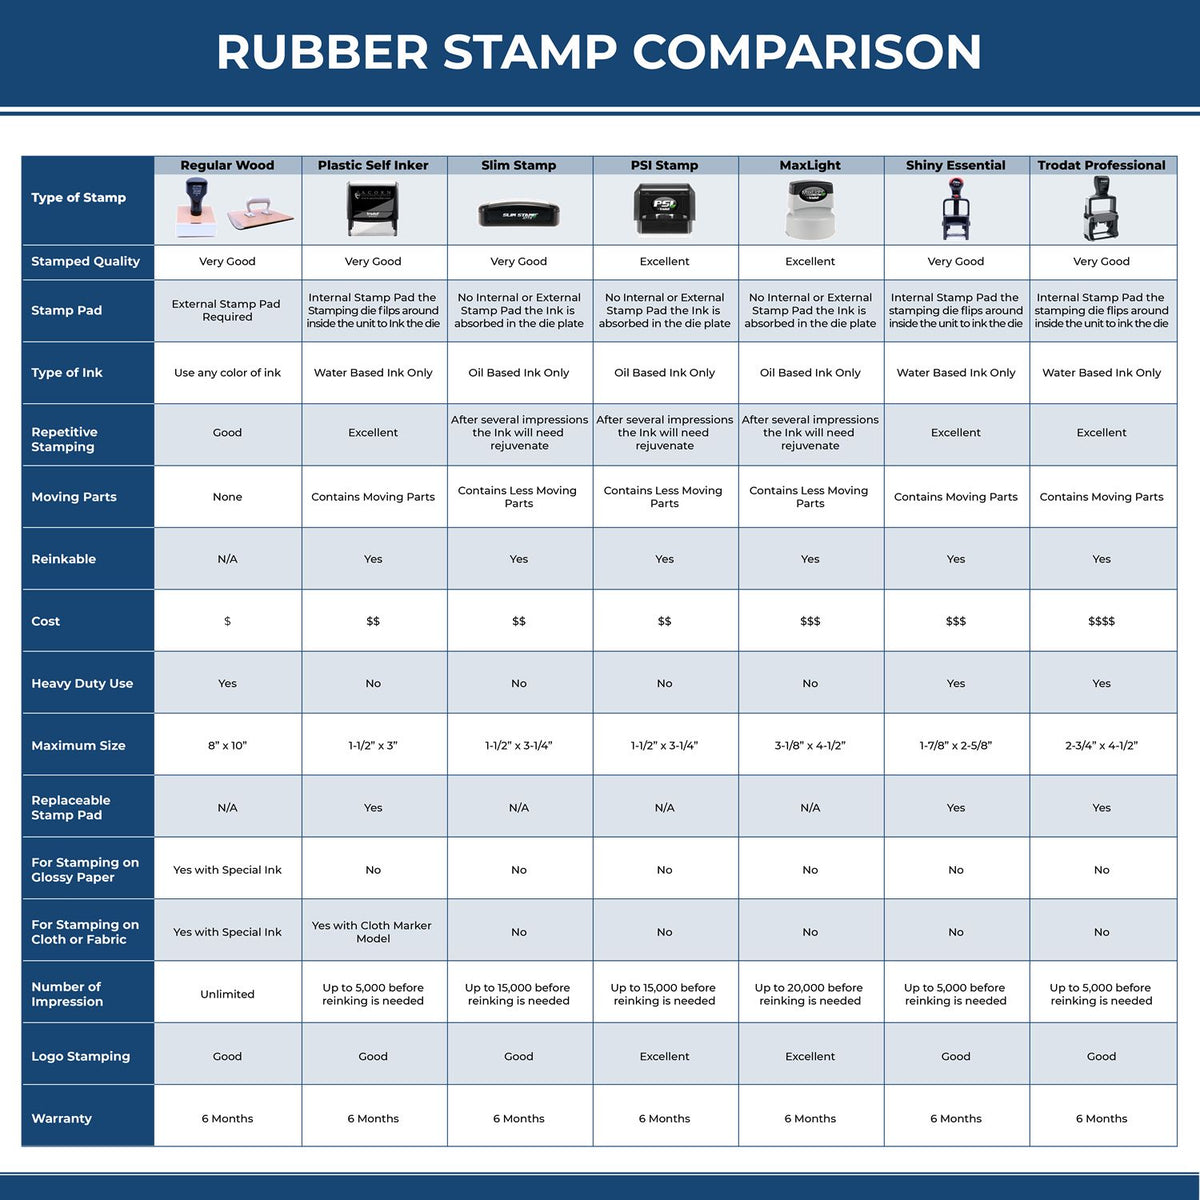 Large Self-Inking Void with Strikelines Stamp 5561S Rubber Stamp Comparison